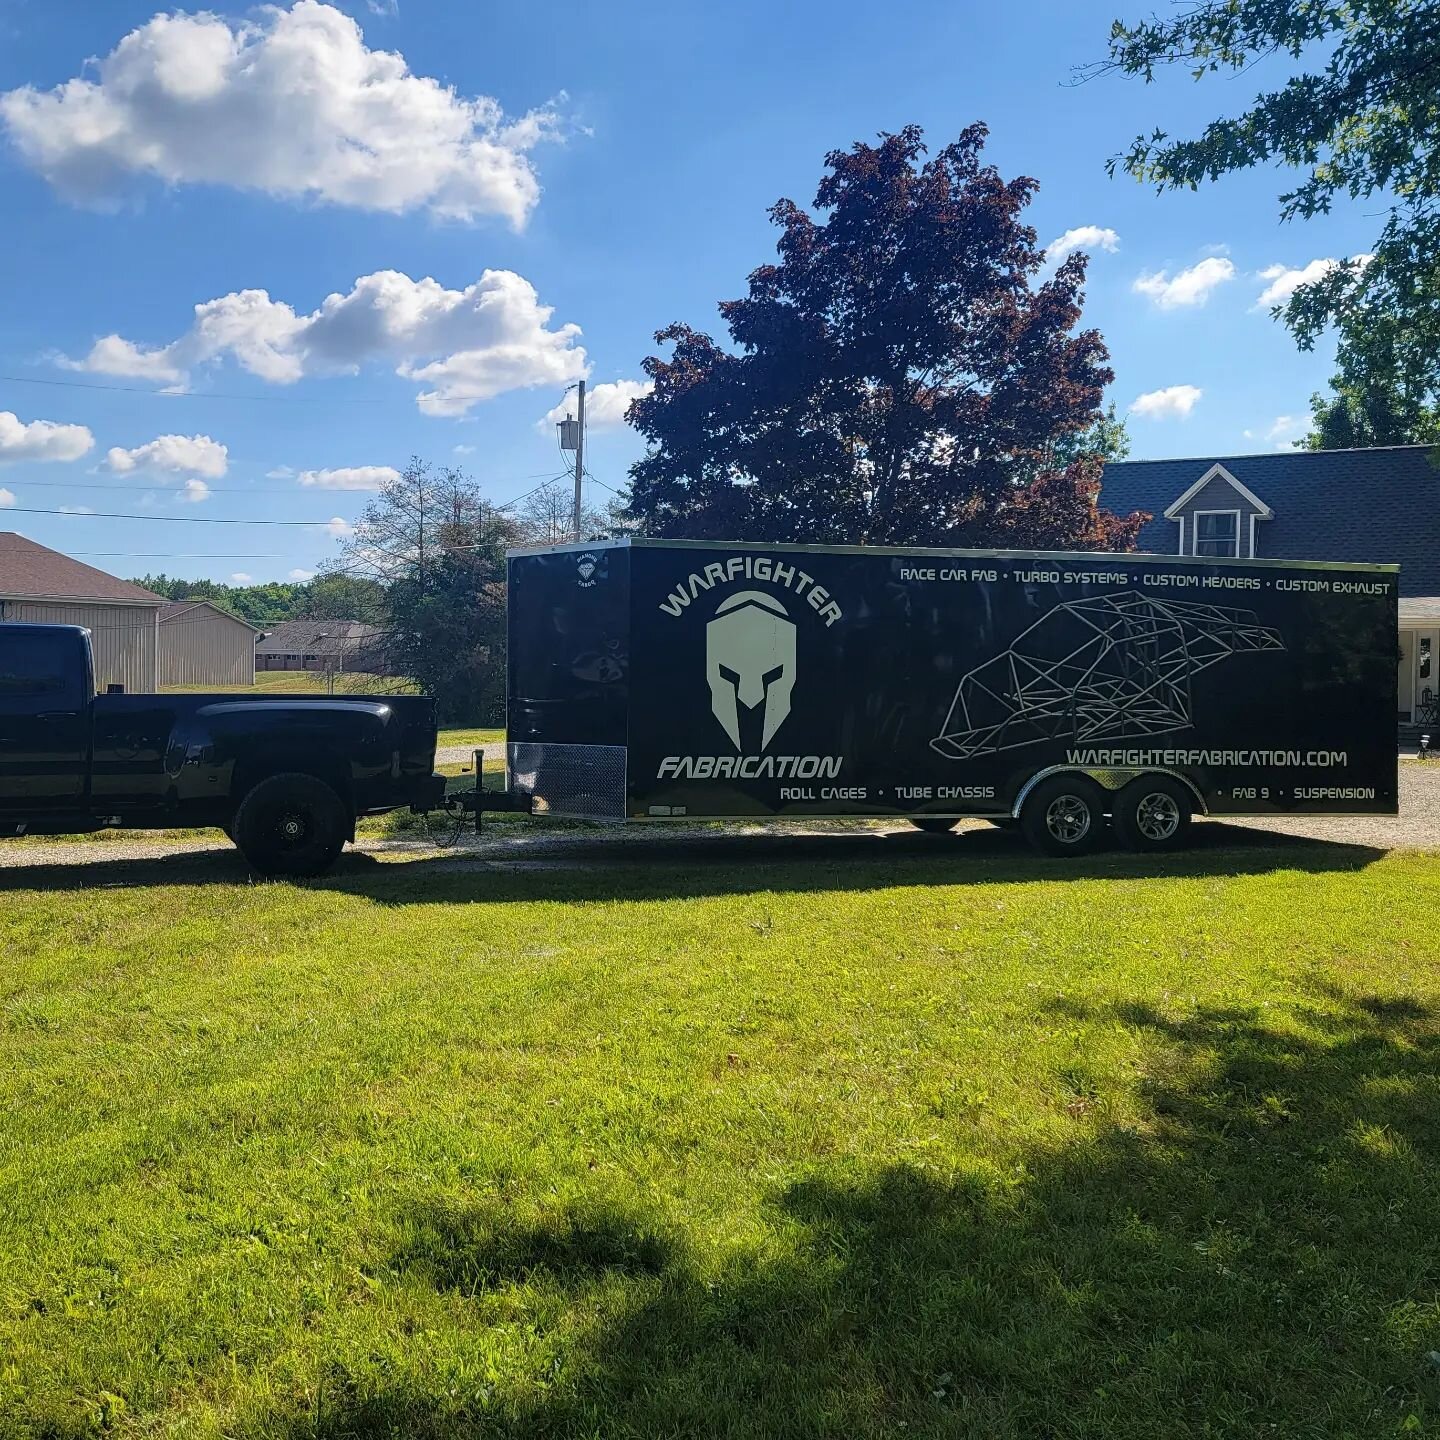 Got the trailer wrapped.